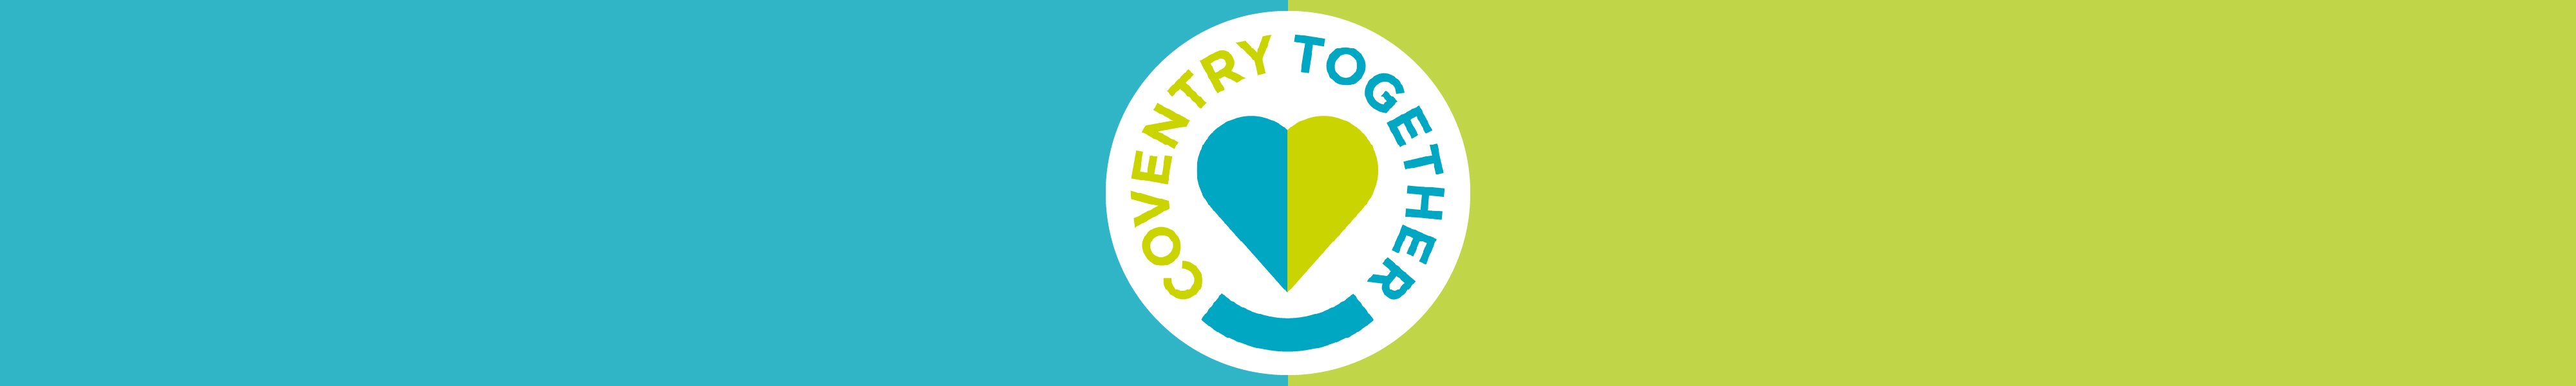 Coventry Together logo